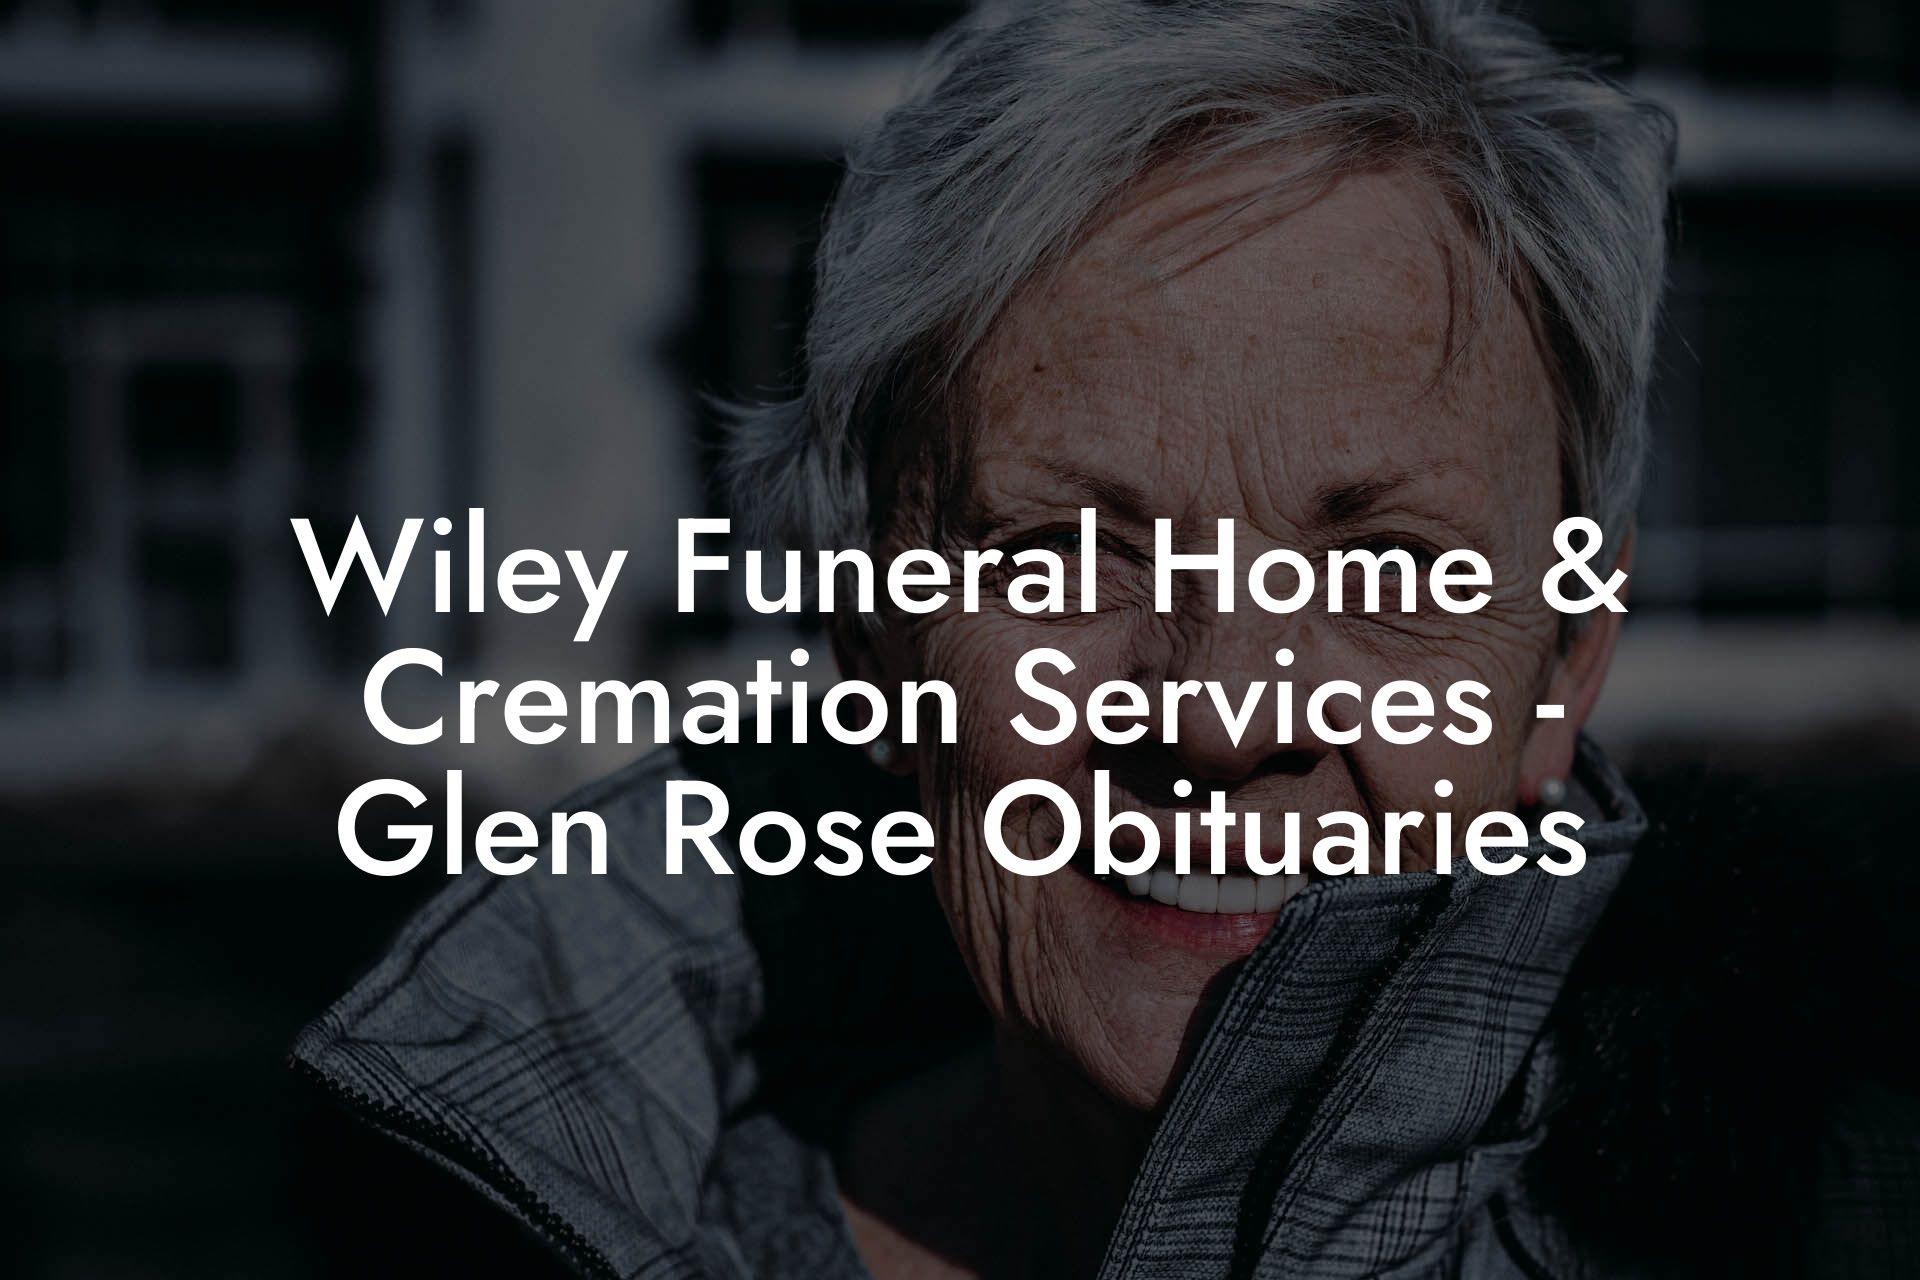 Wiley Funeral Home & Cremation Services – Glen Rose Obituaries